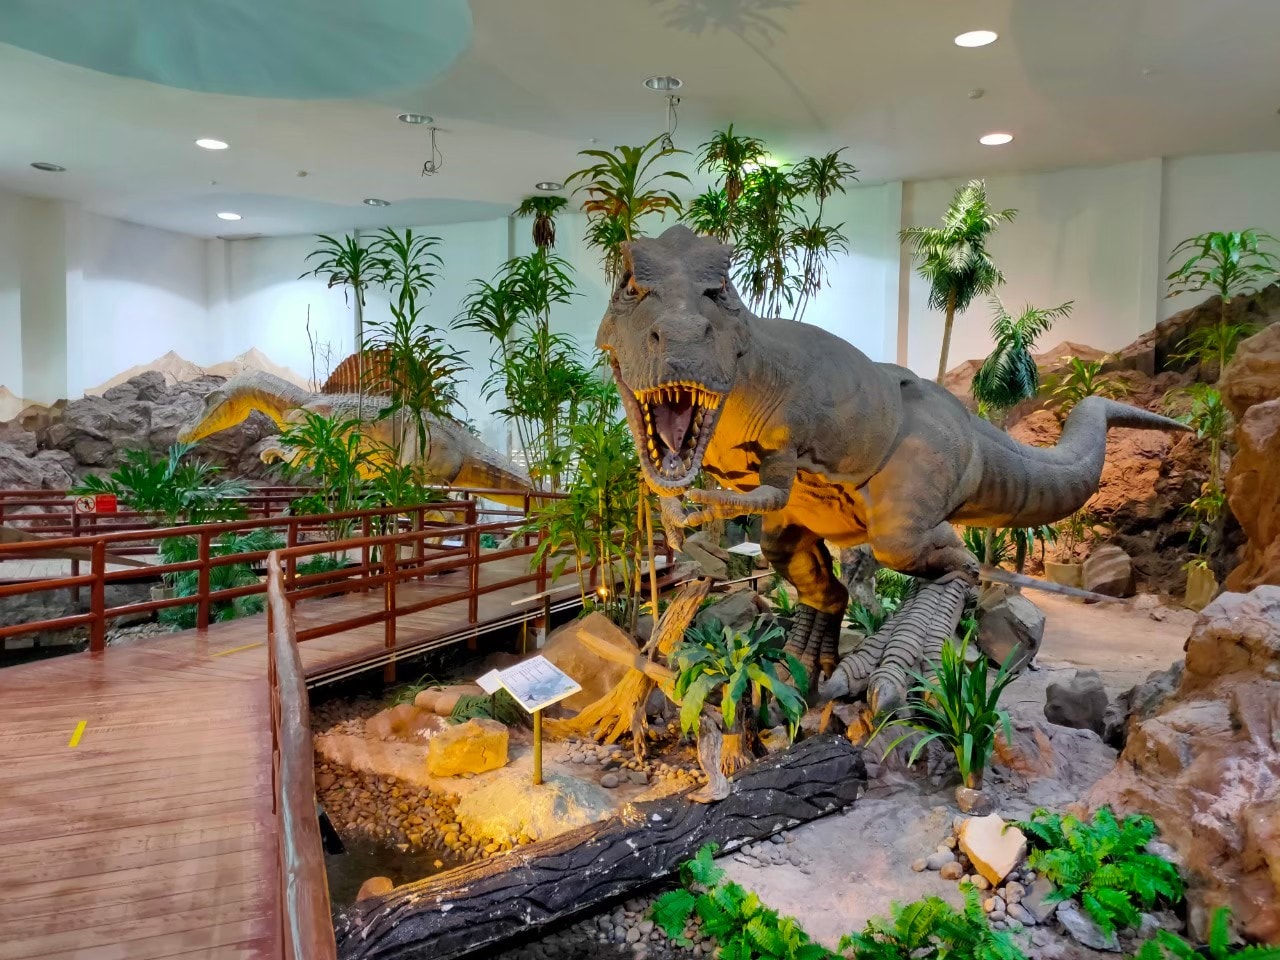 MUST JOIN : Phu Wiang Fossil Research Center and Dinosaur Museum